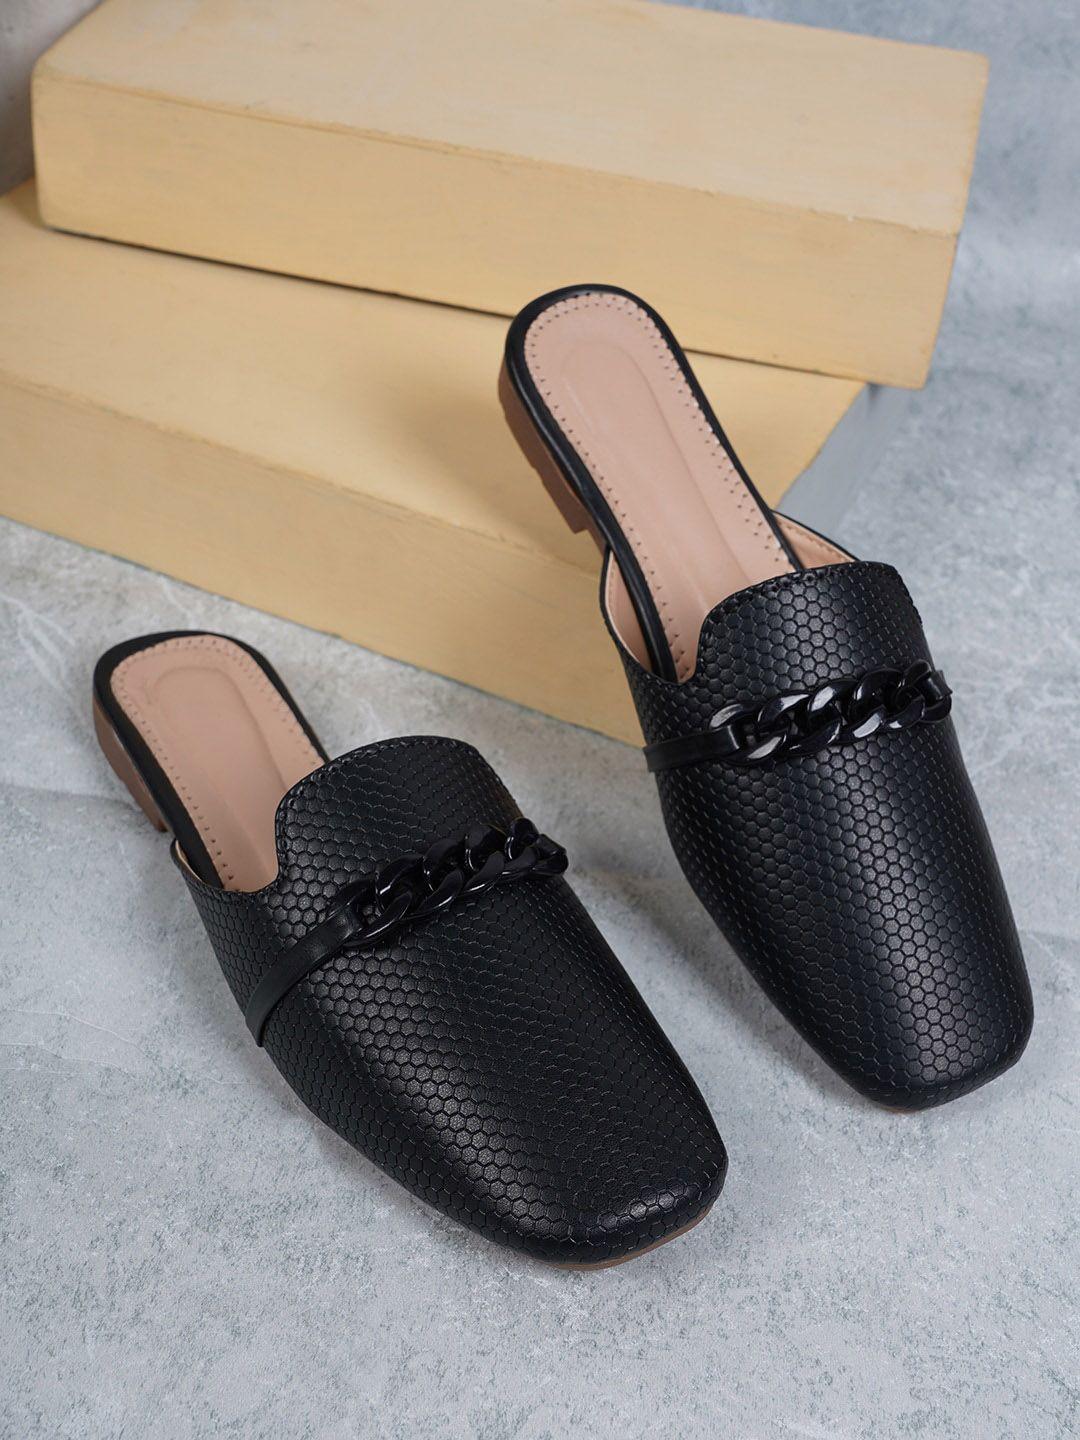 style shoes textured square toe mules